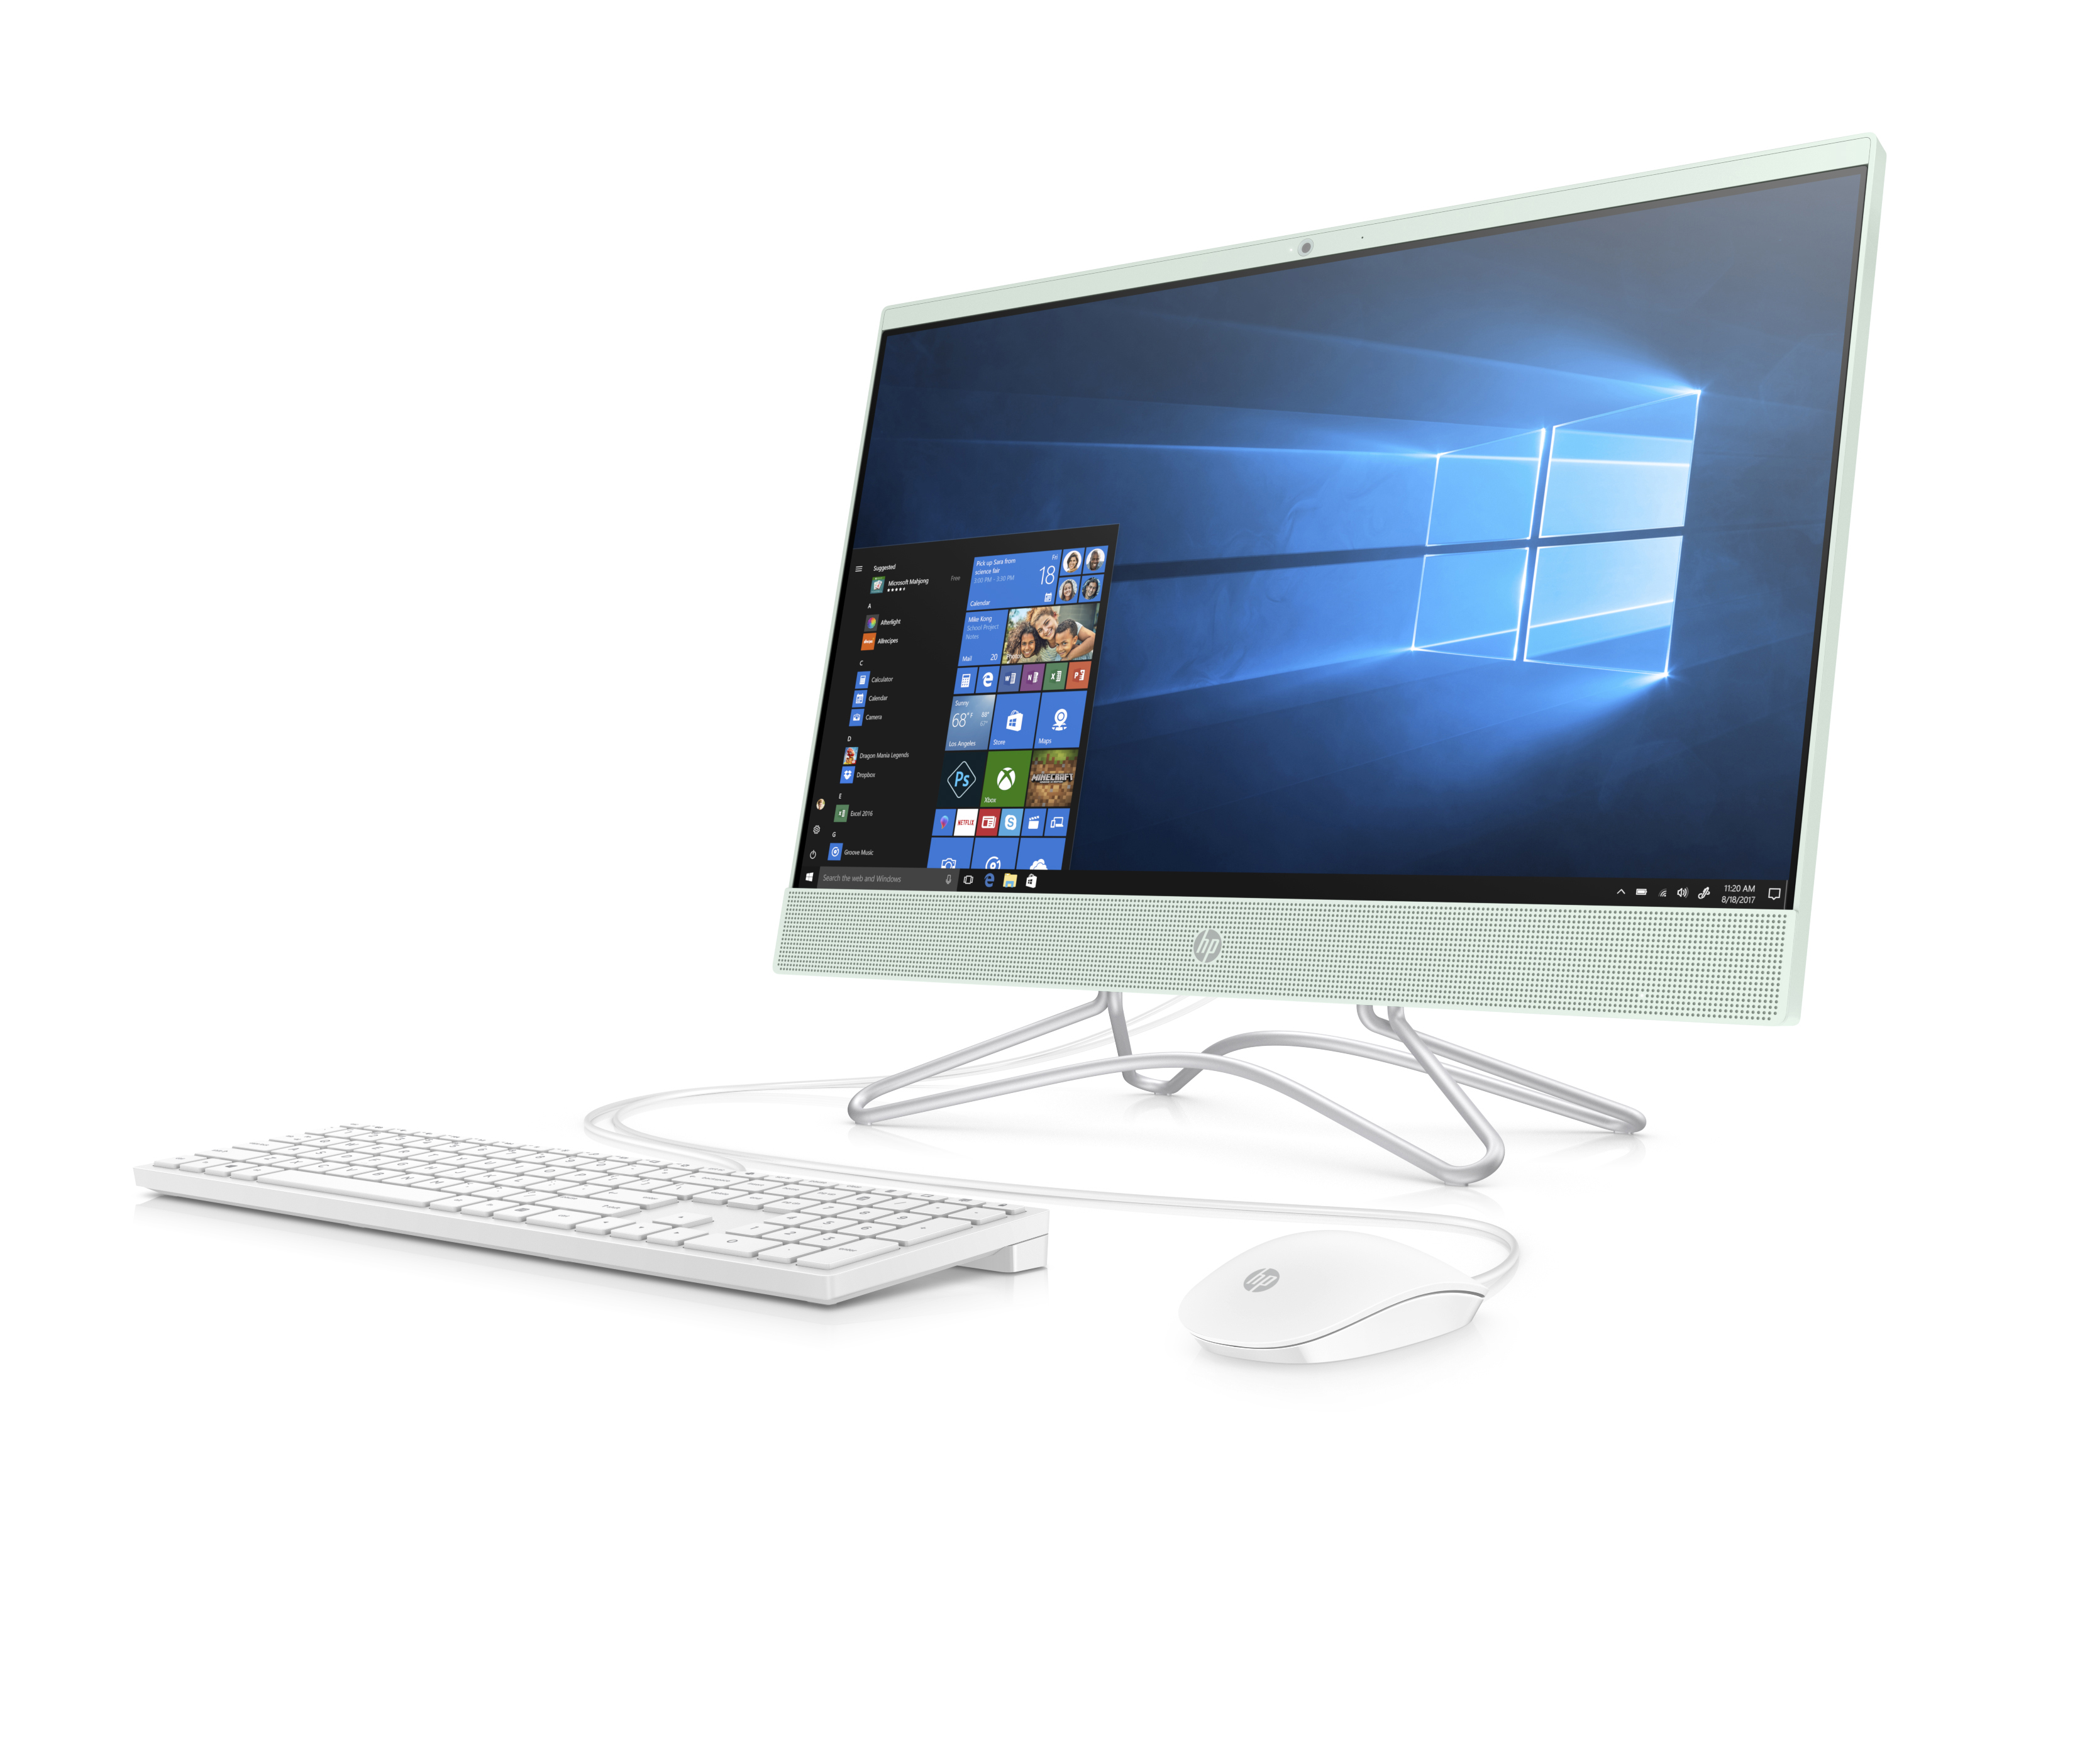 HP 22-c0073w All-in-One PC, 22" Display, Intel Celeron G4900T 2.9 GHz, 4GB RAM, 1TB HDD - image 3 of 5